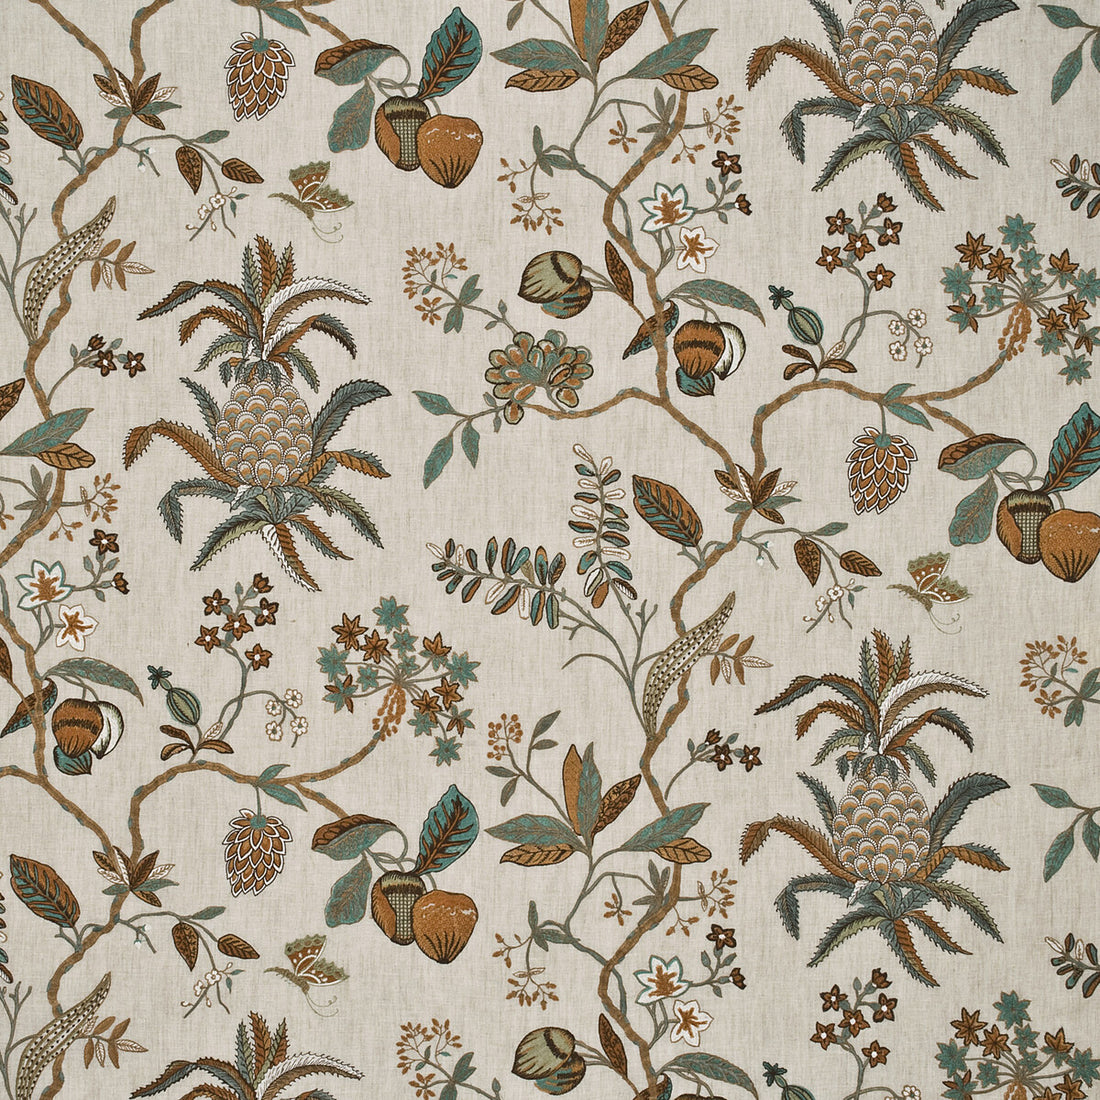 Exotic Pineapple Linen fabric in sage/dove color - pattern BF10347.1.0 - by G P &amp; J Baker in the Oleander collection